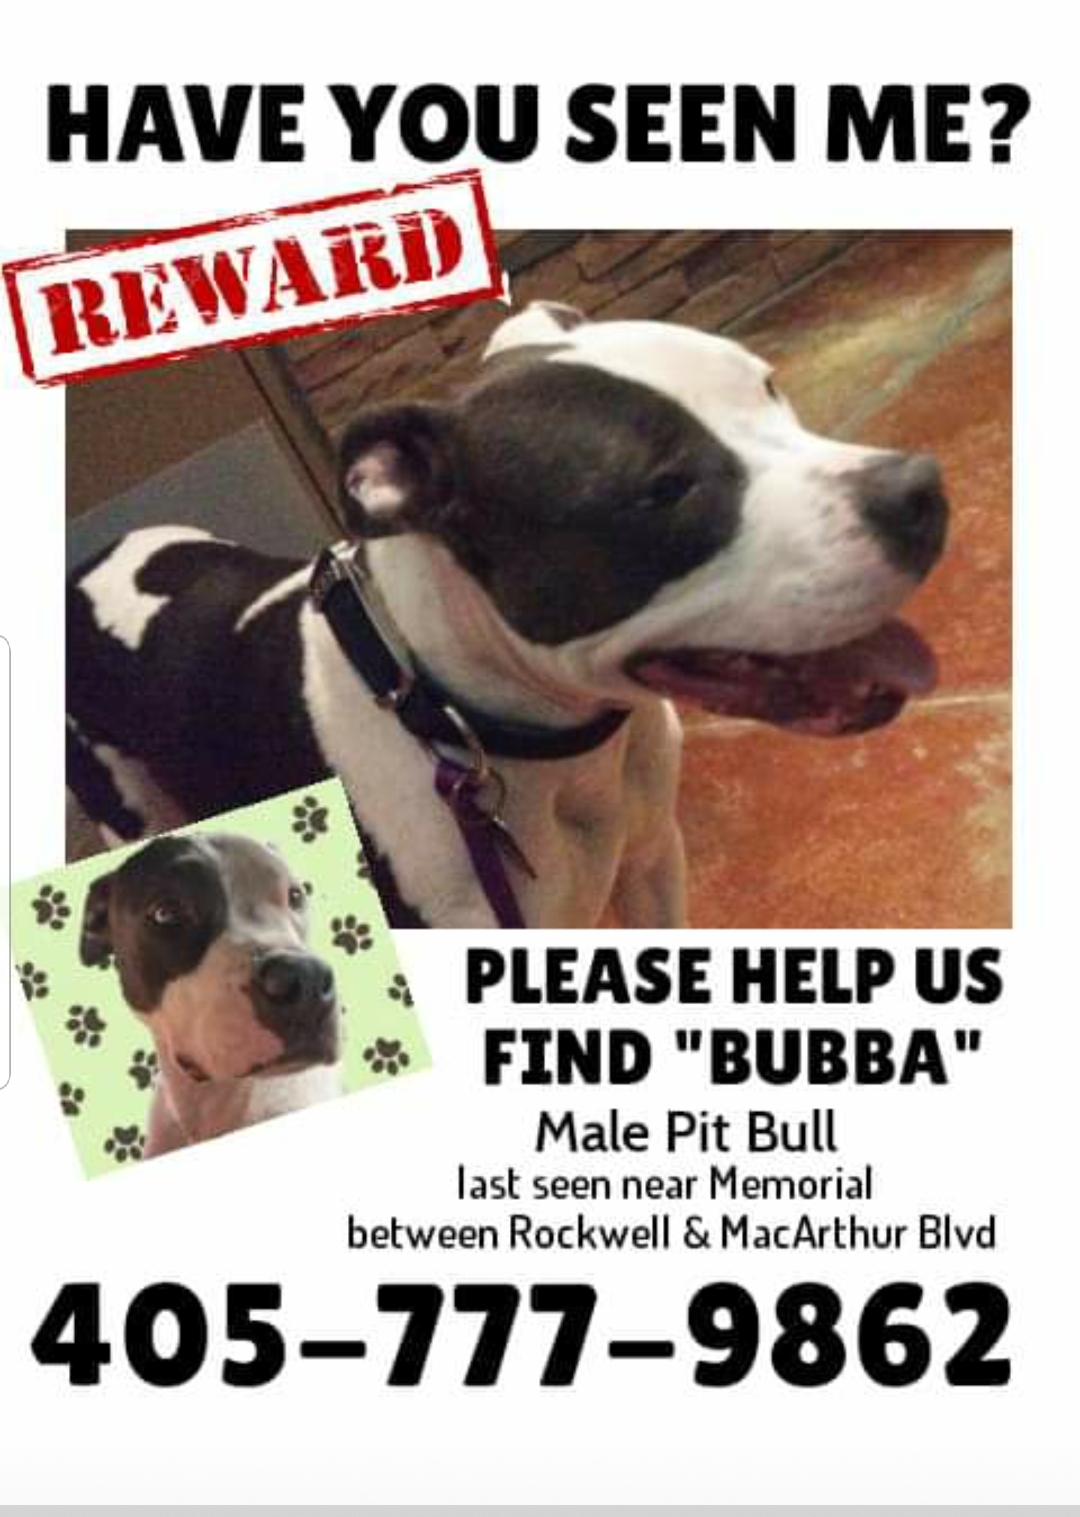 Image of Bubba, Lost Dog